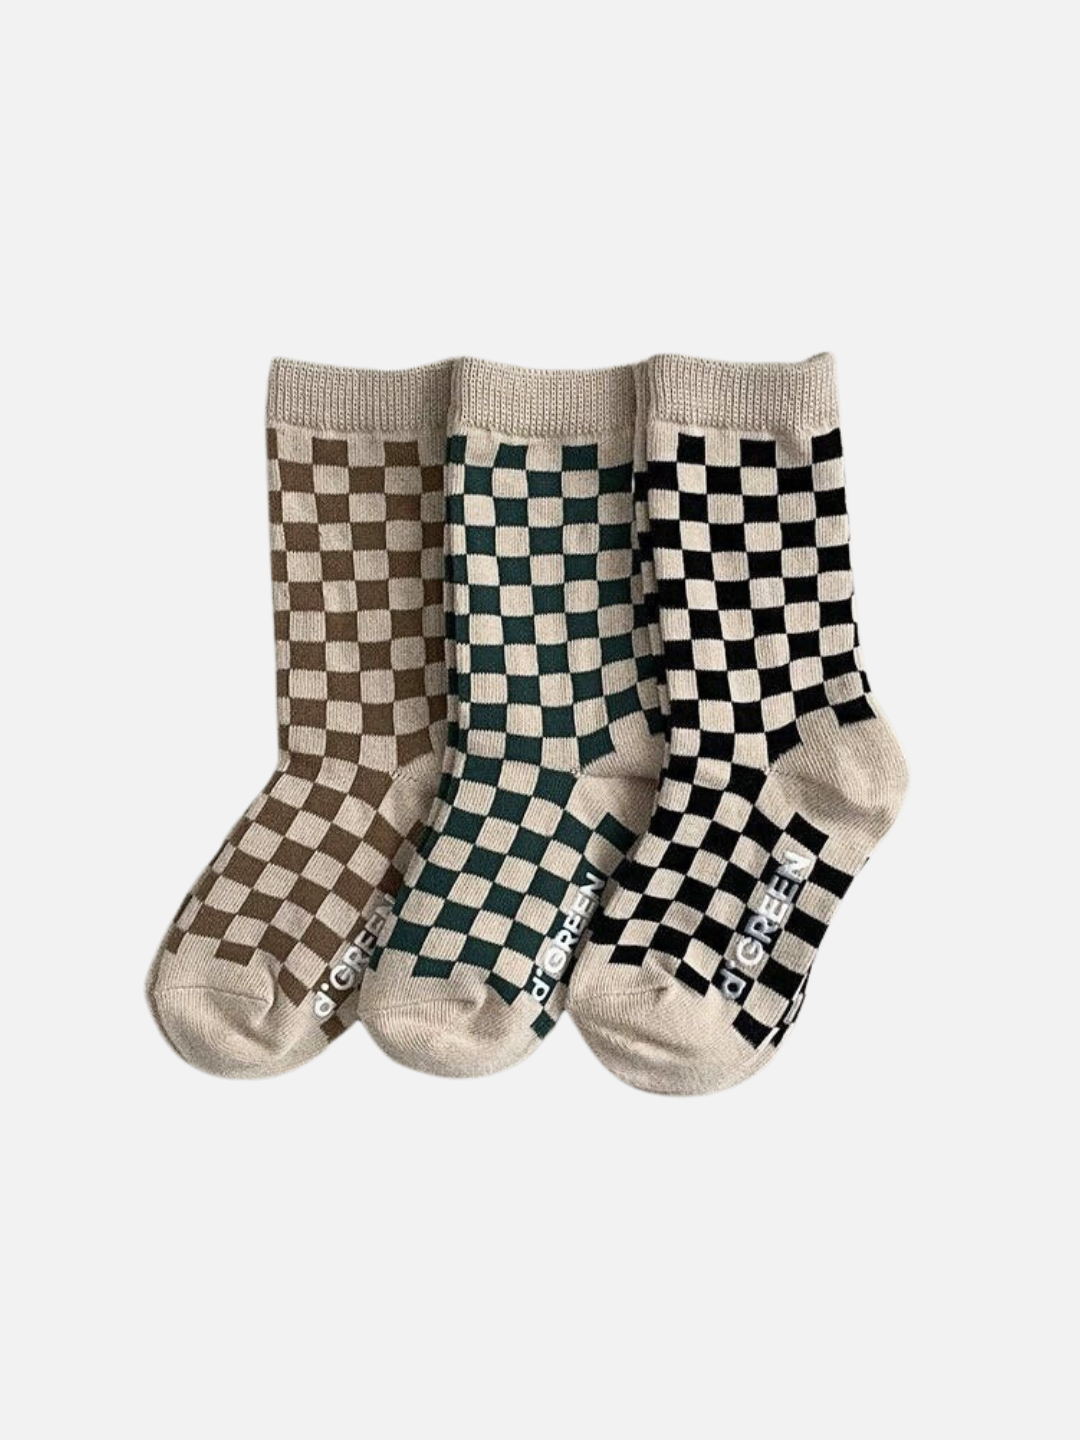 Set of three pairs of kids' checkerboard socks, in light brown, forest green, and black, on an ecru background